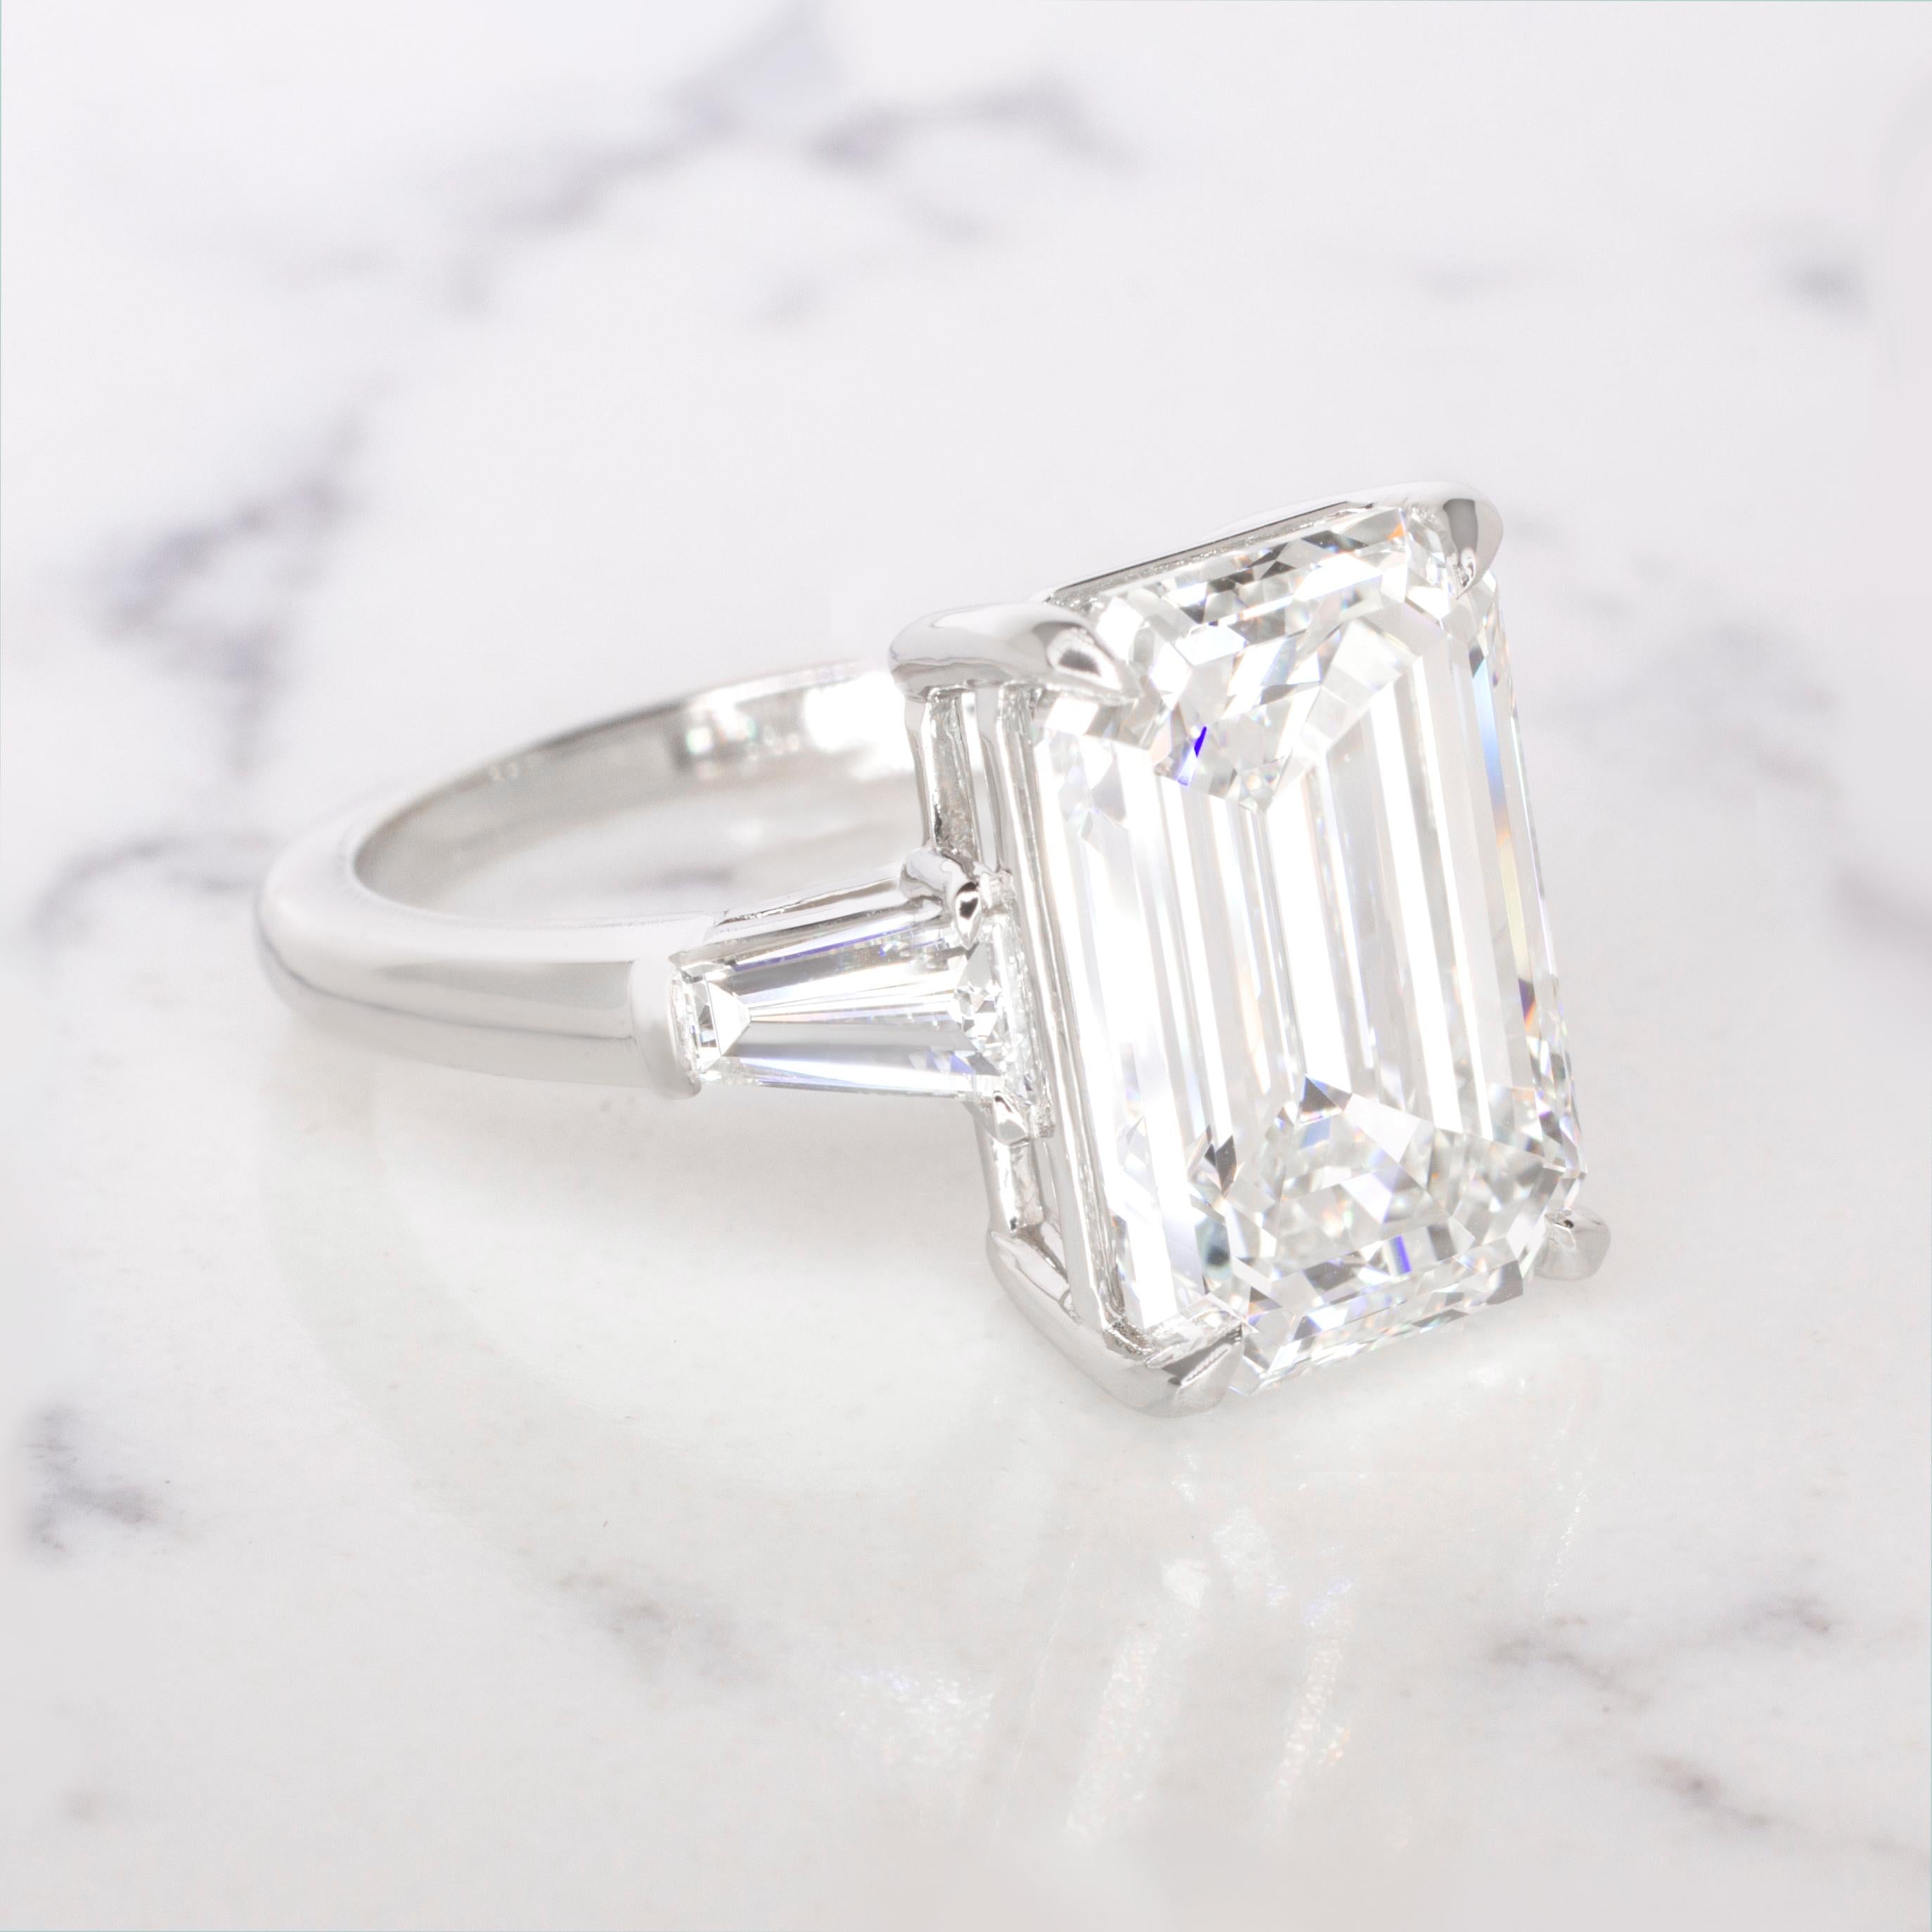 Modern Stunning GIA Certified 5 Carat F Color VVS1 Emerald Cut Diamond Ring For Sale